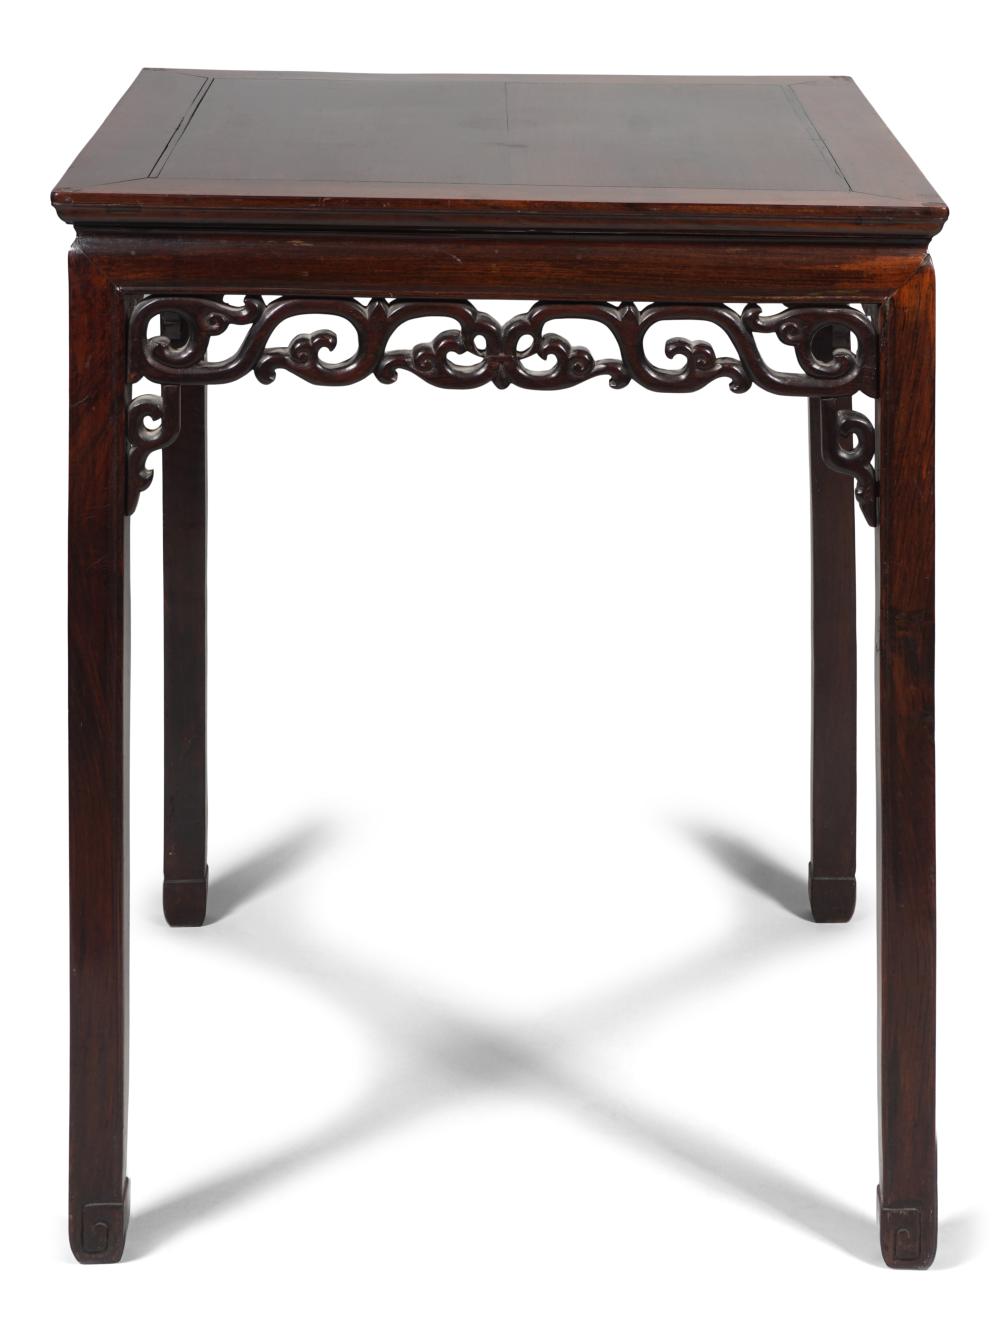 CHINESE HARDWOOD SIDE TABLE 19TH 3c79cb